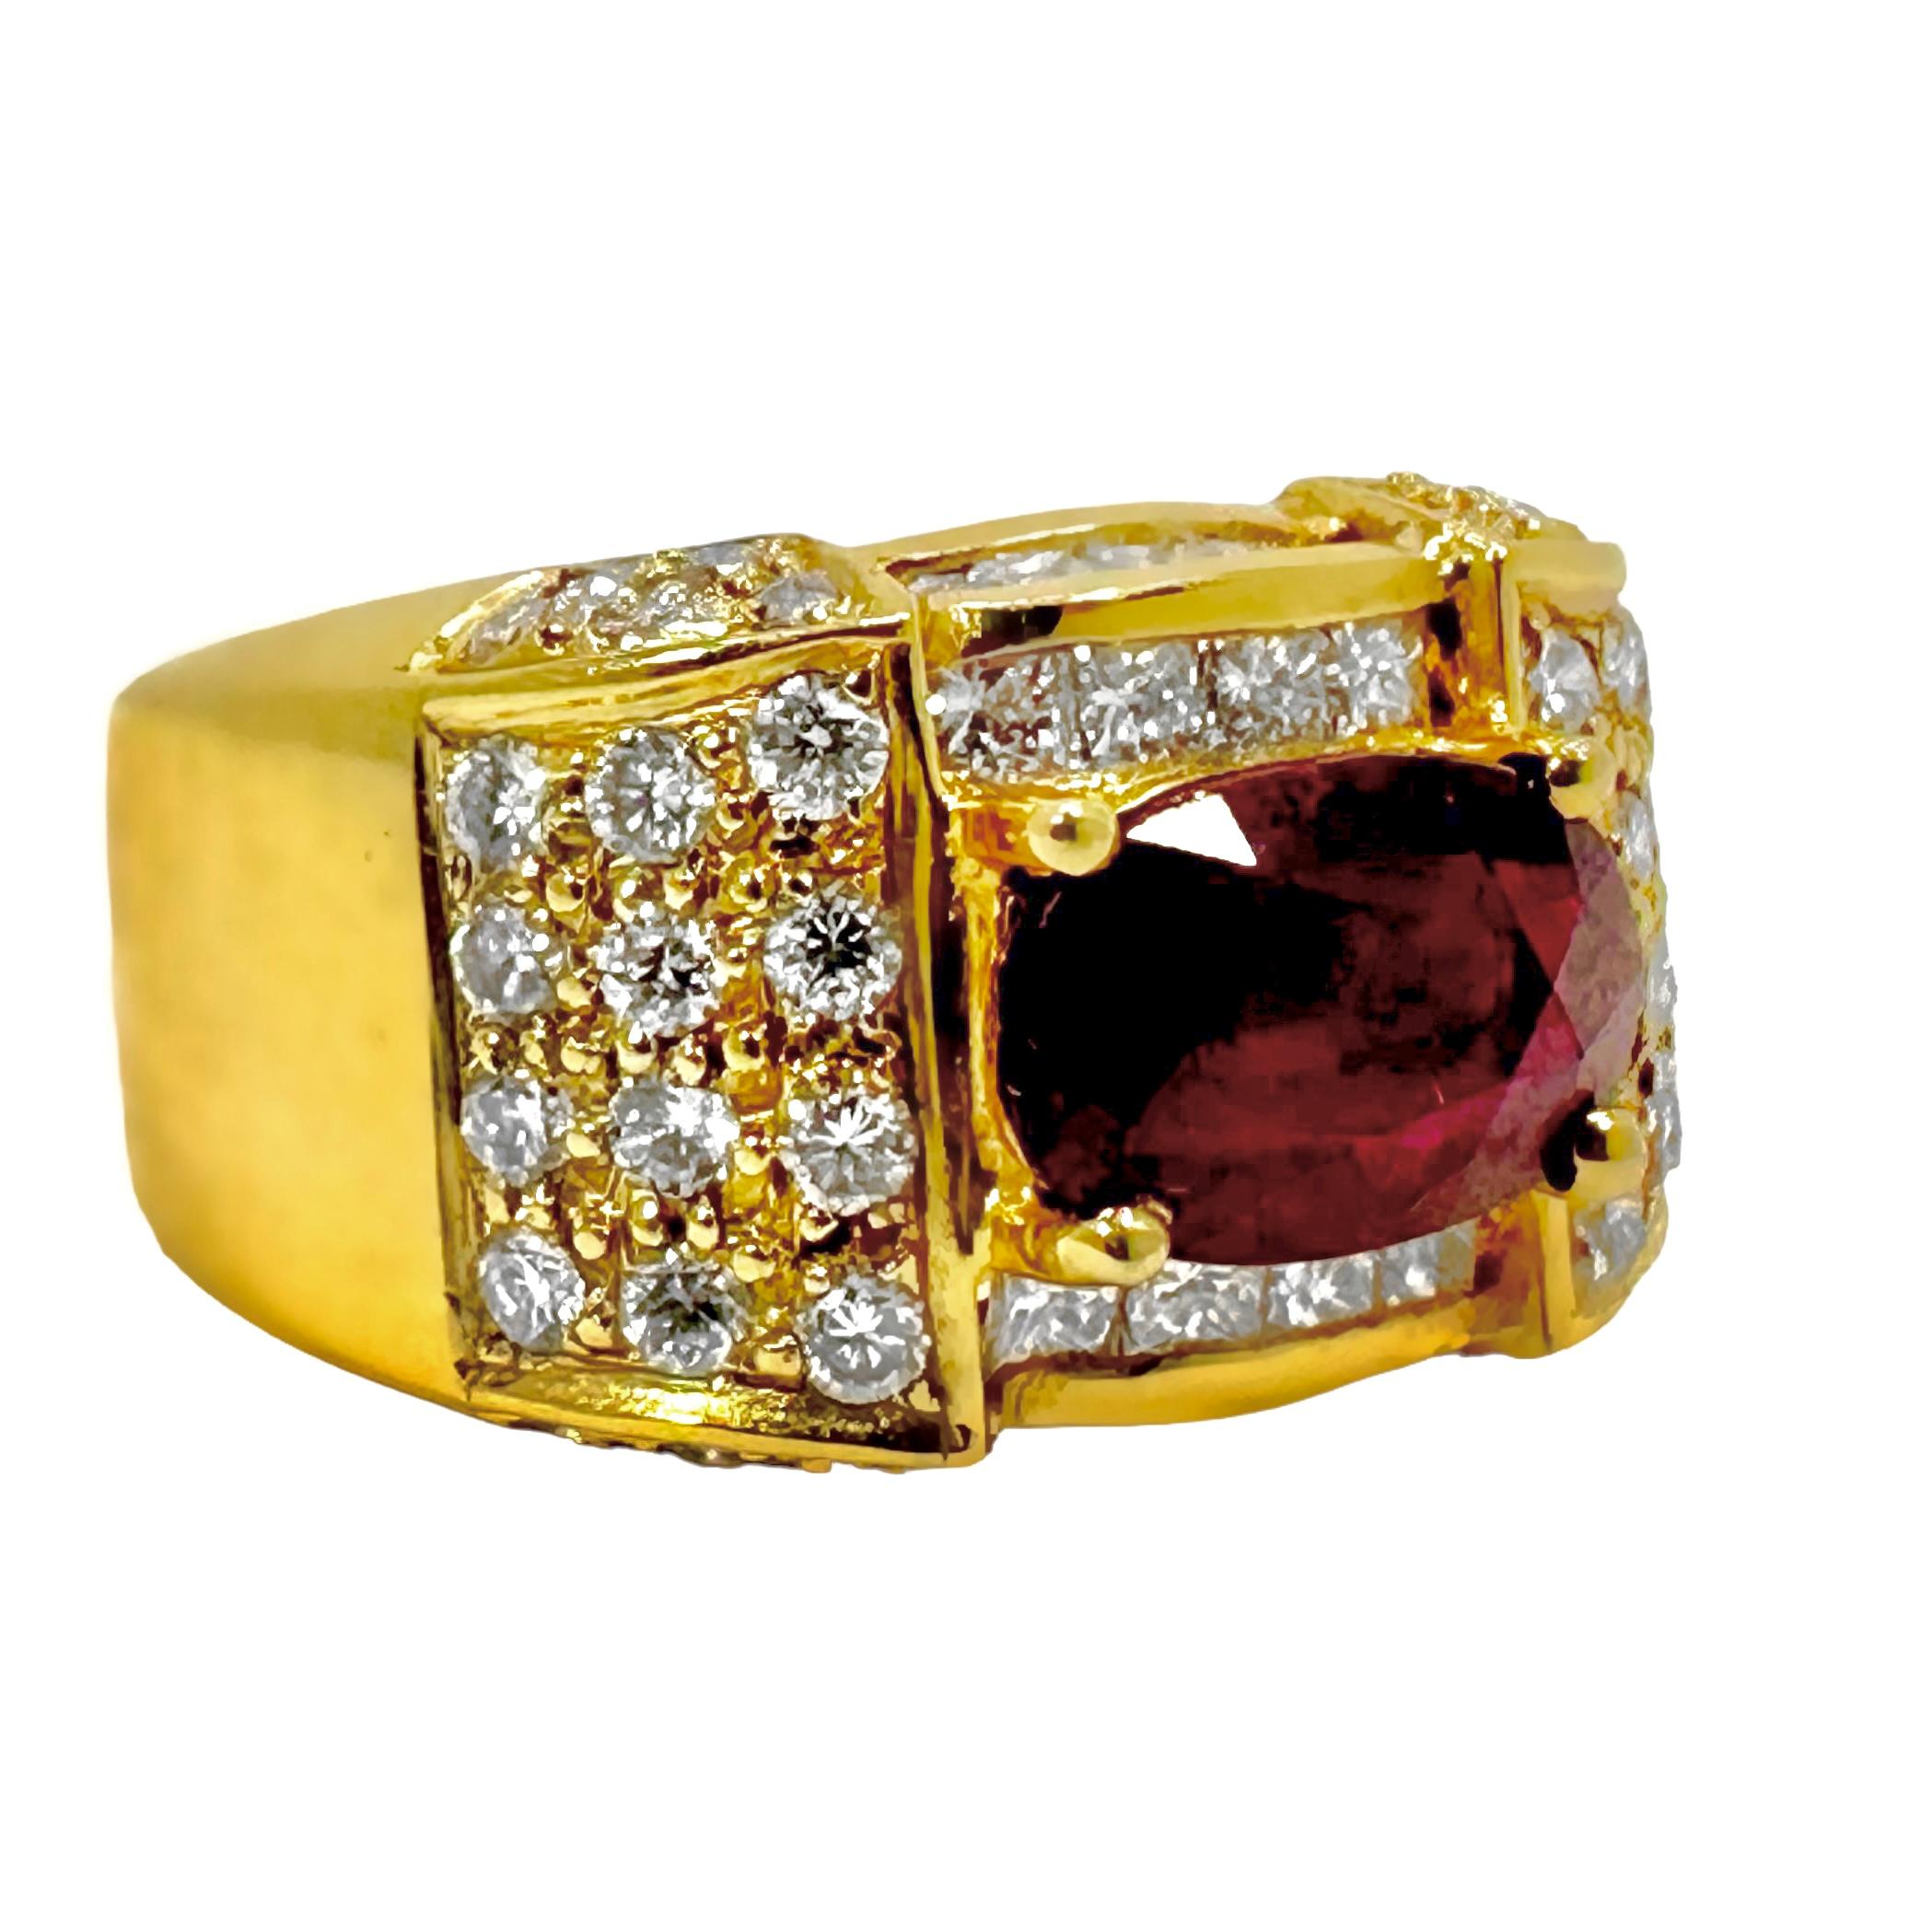 Late-20th Century Tailored 18k Yellow Gold, Ruby and Diamond Cocktail Ring For Sale 2